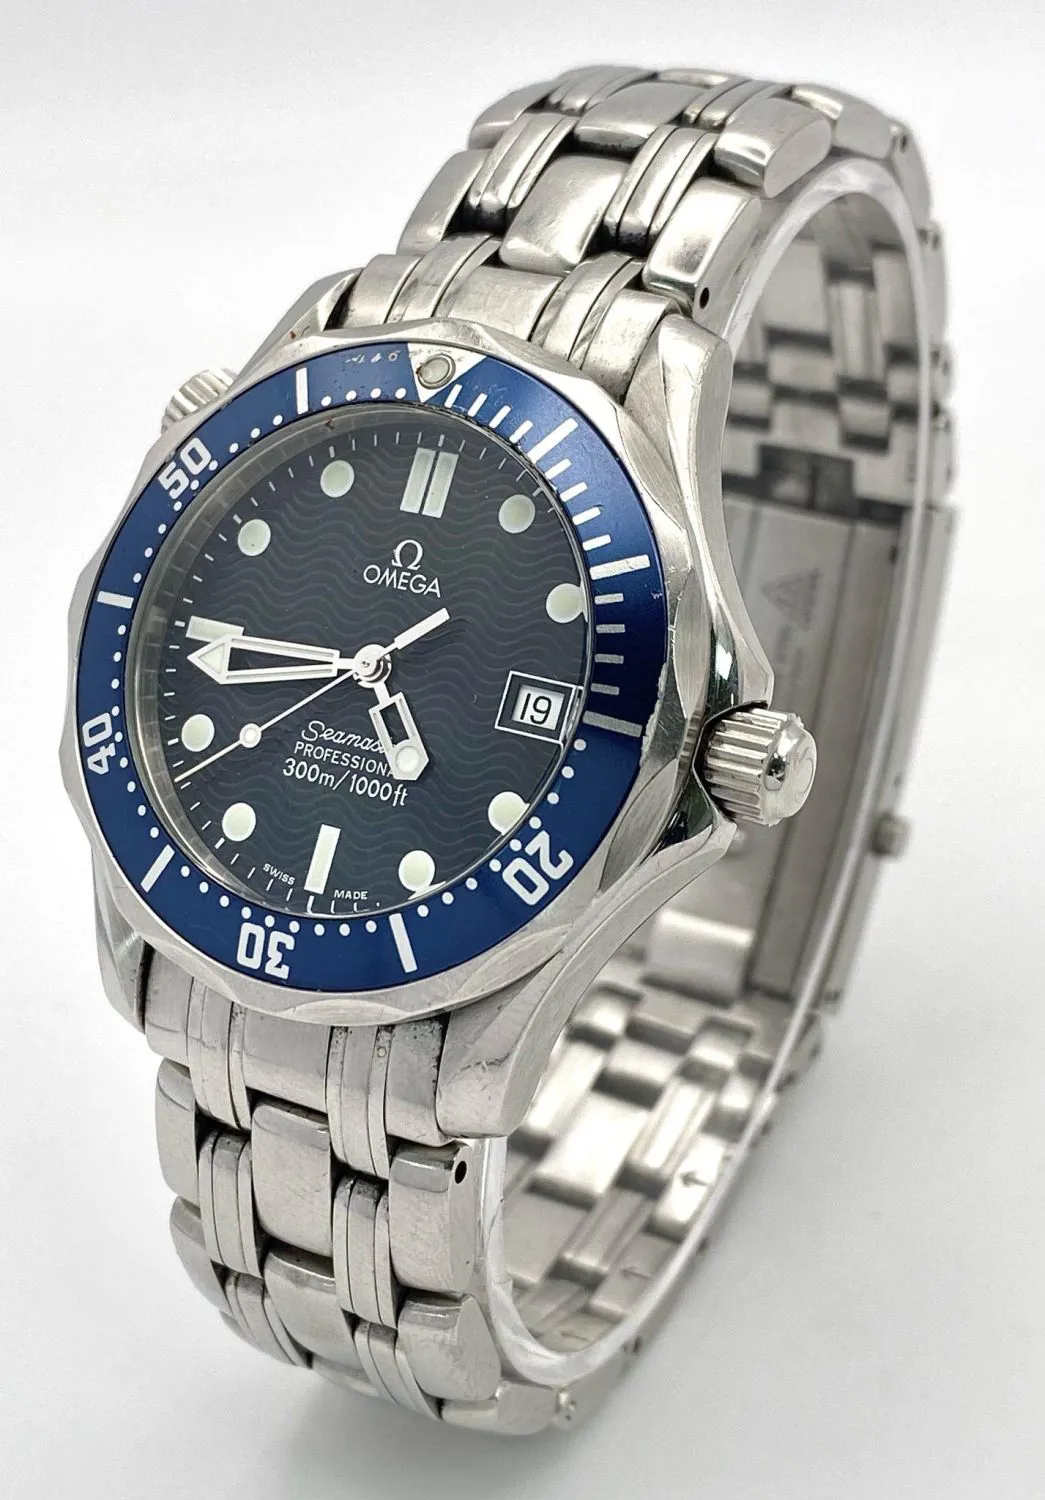 Omega Seamaster Professional 016792 37mm Stainless steel Blue